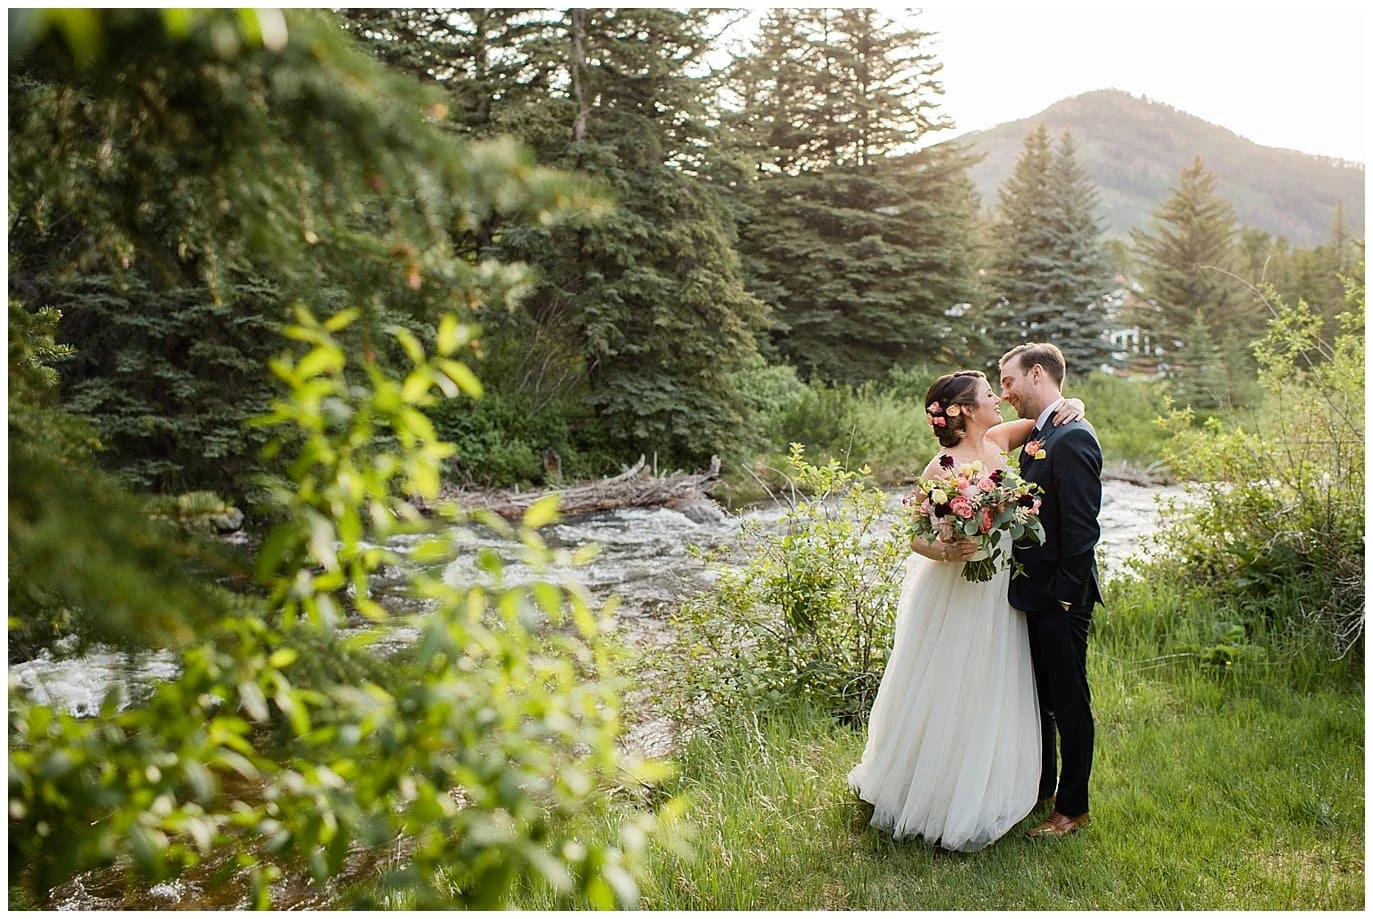 Bride and groom in rocky mountain forest at Sonnenalp Hotel Vail Colorado Wedding by Vail Wedding Photographer Jennie Crate